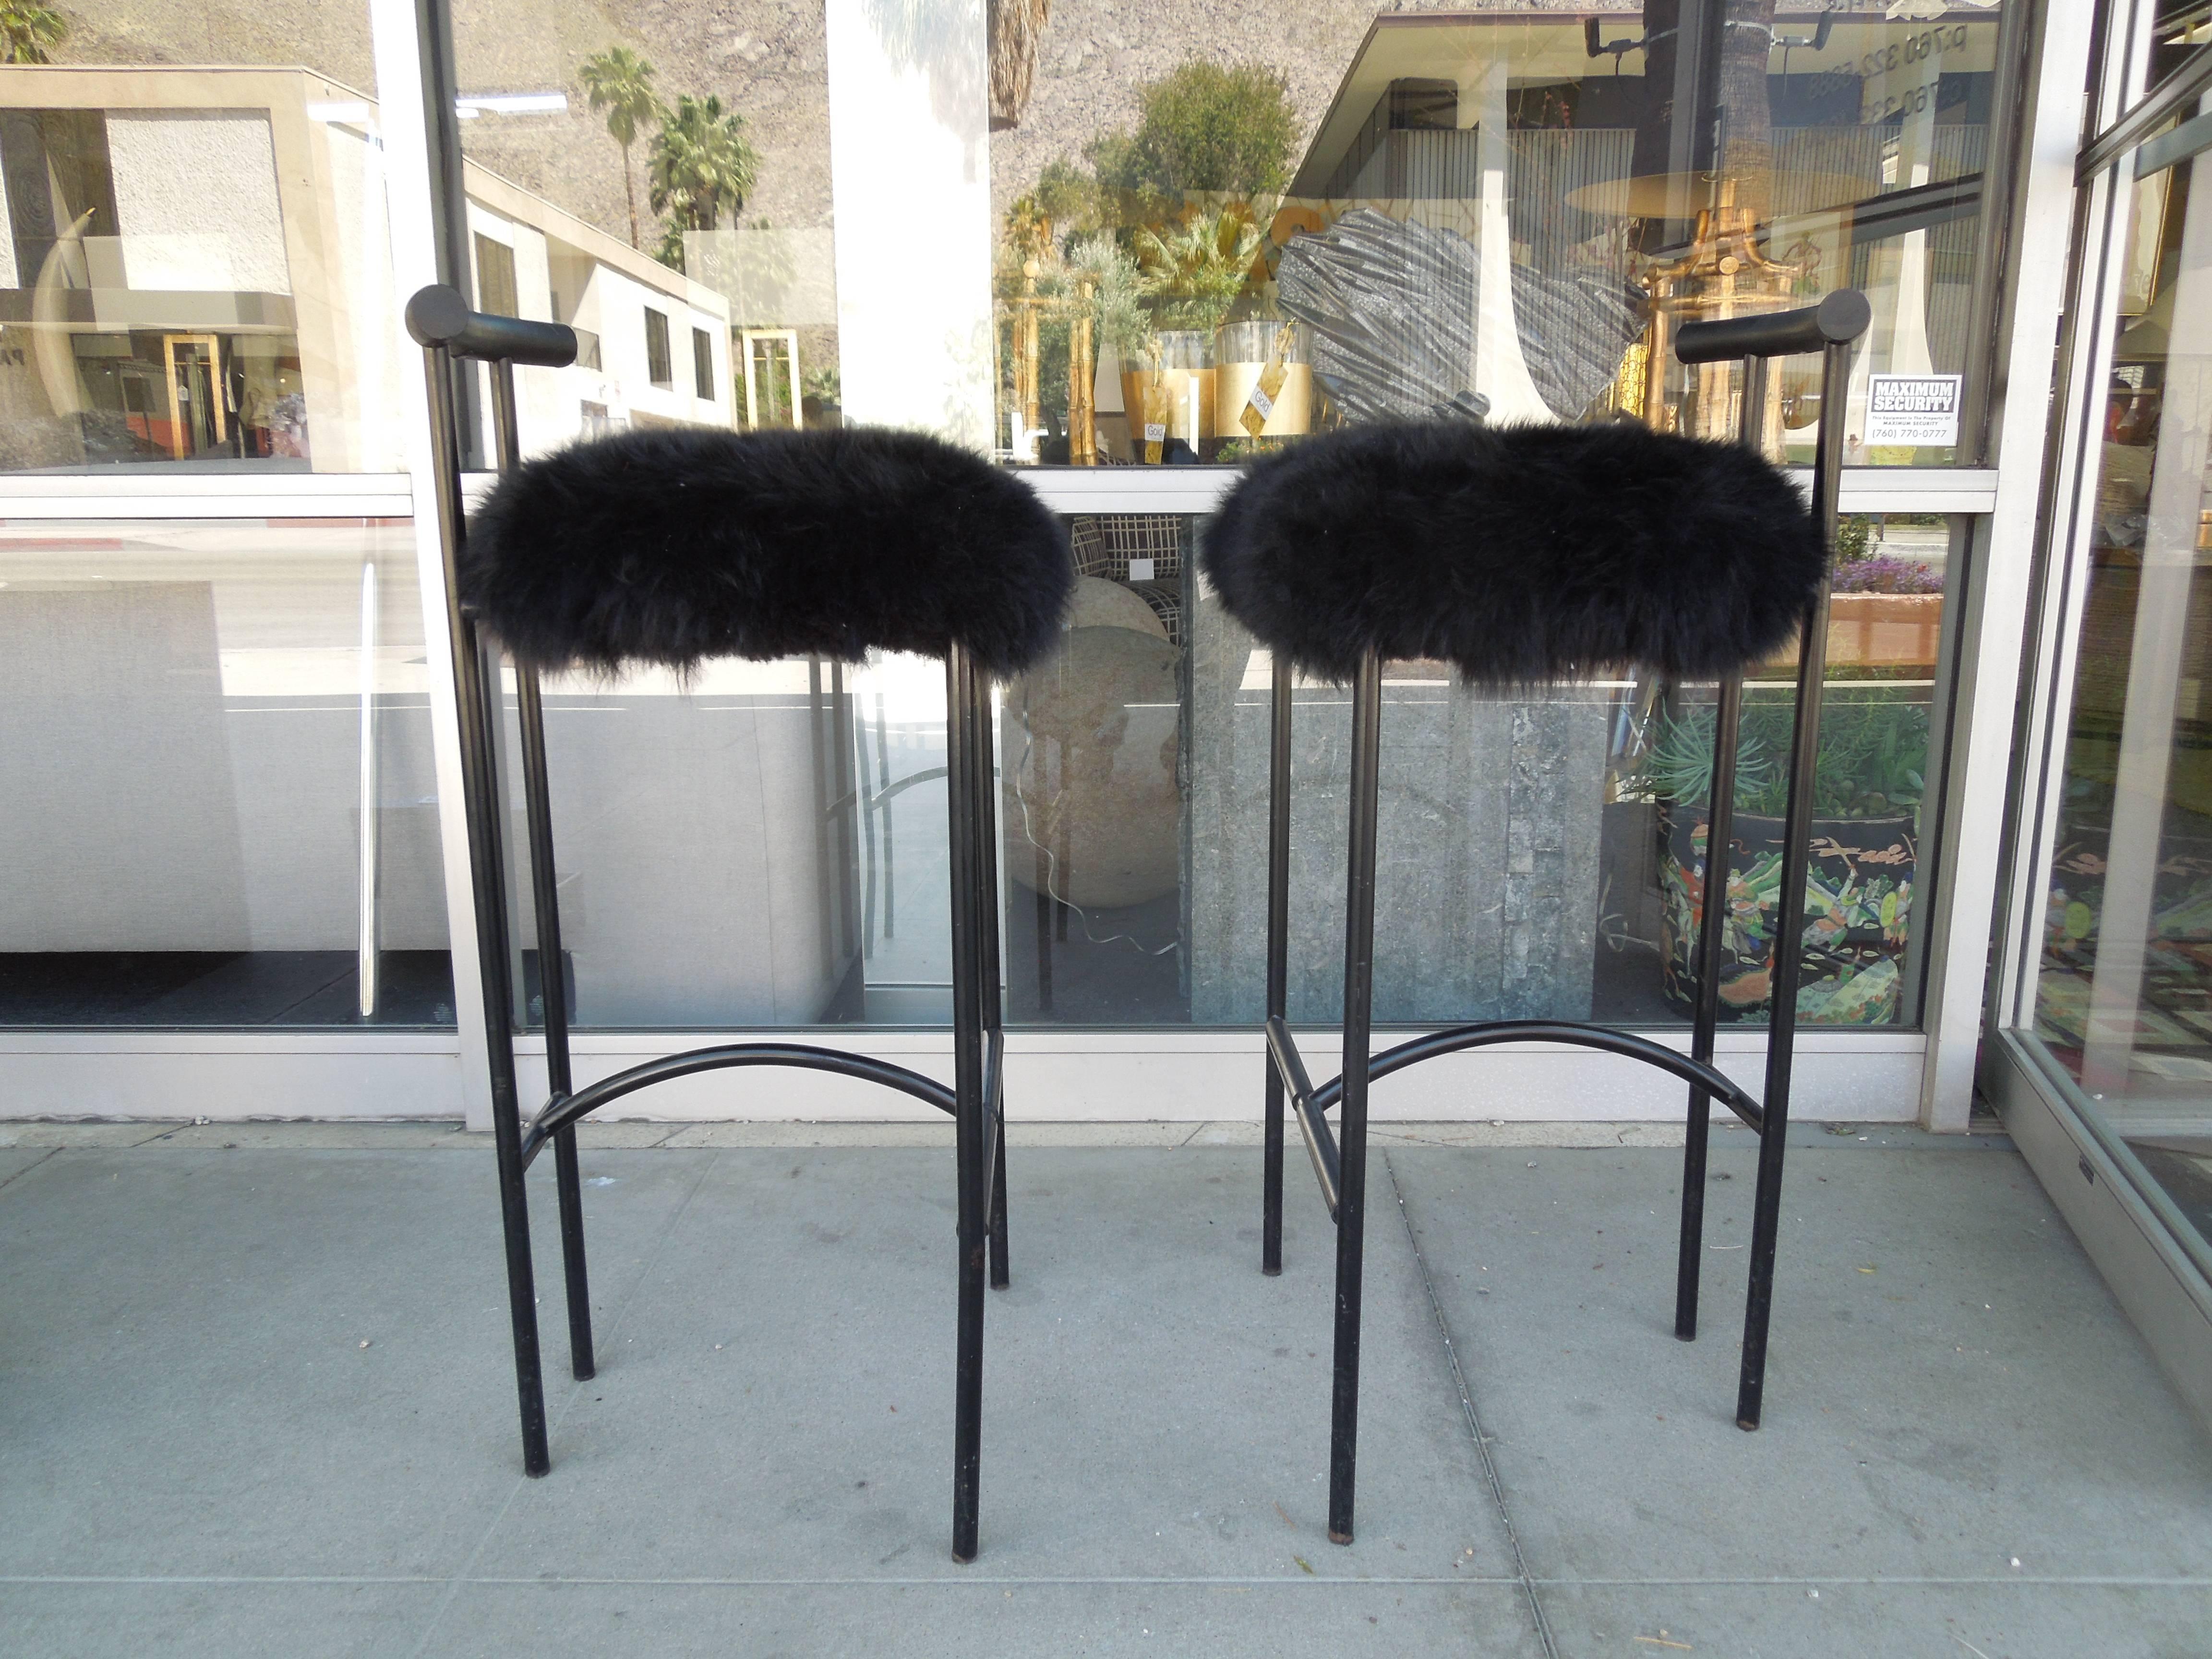 A super chic pair of Tokyo barstools designed by talented UK designer Rodney Kinsman. They are made in Padova, Italy for Bieffeplast. The seat has been covered in black thick sheepskin. Uber modern and chic.